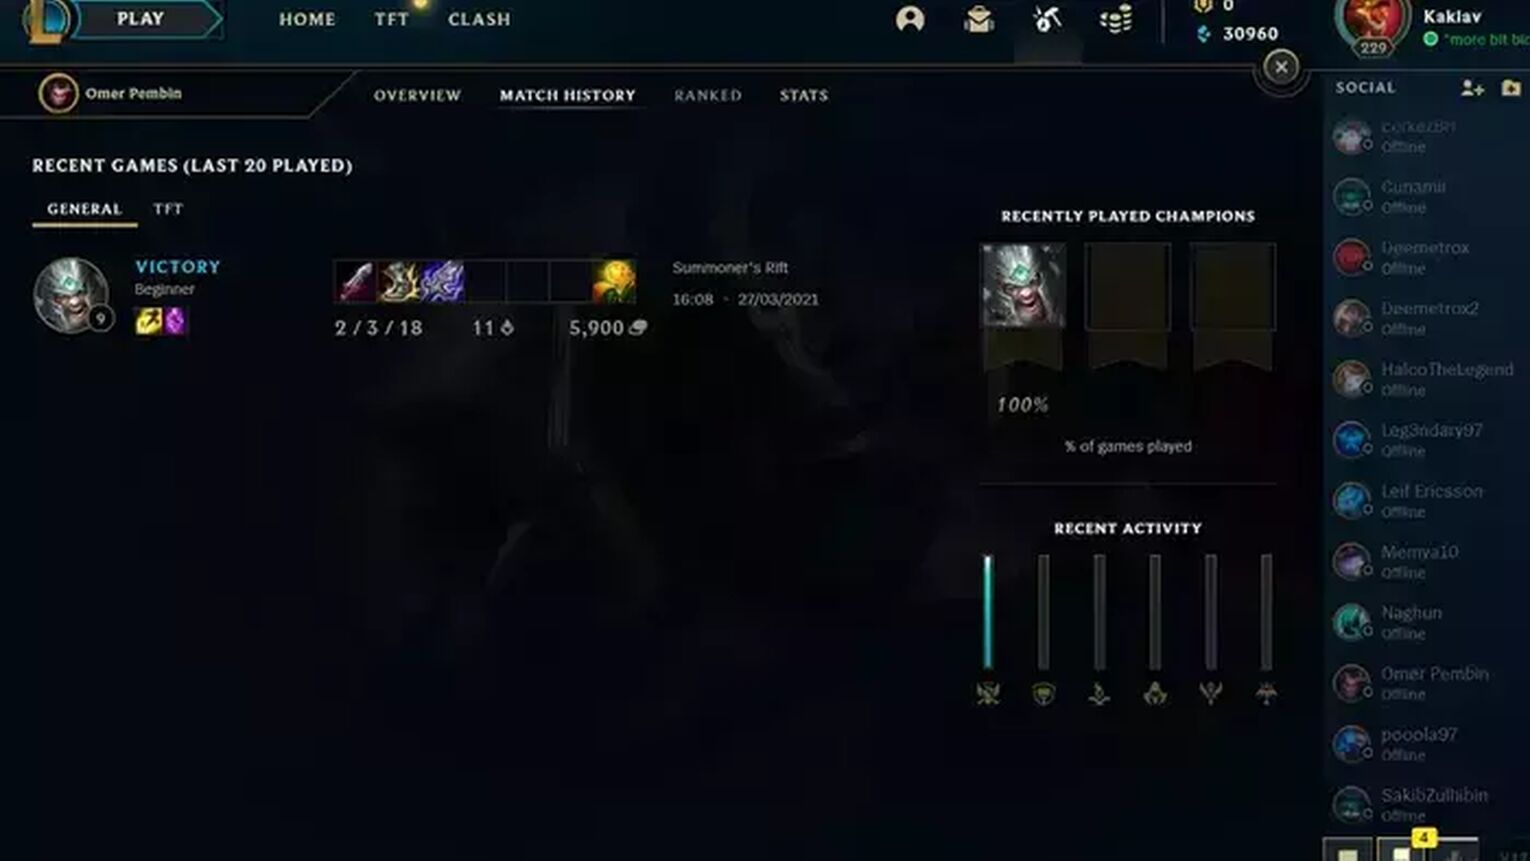 How to recover your LoL Account